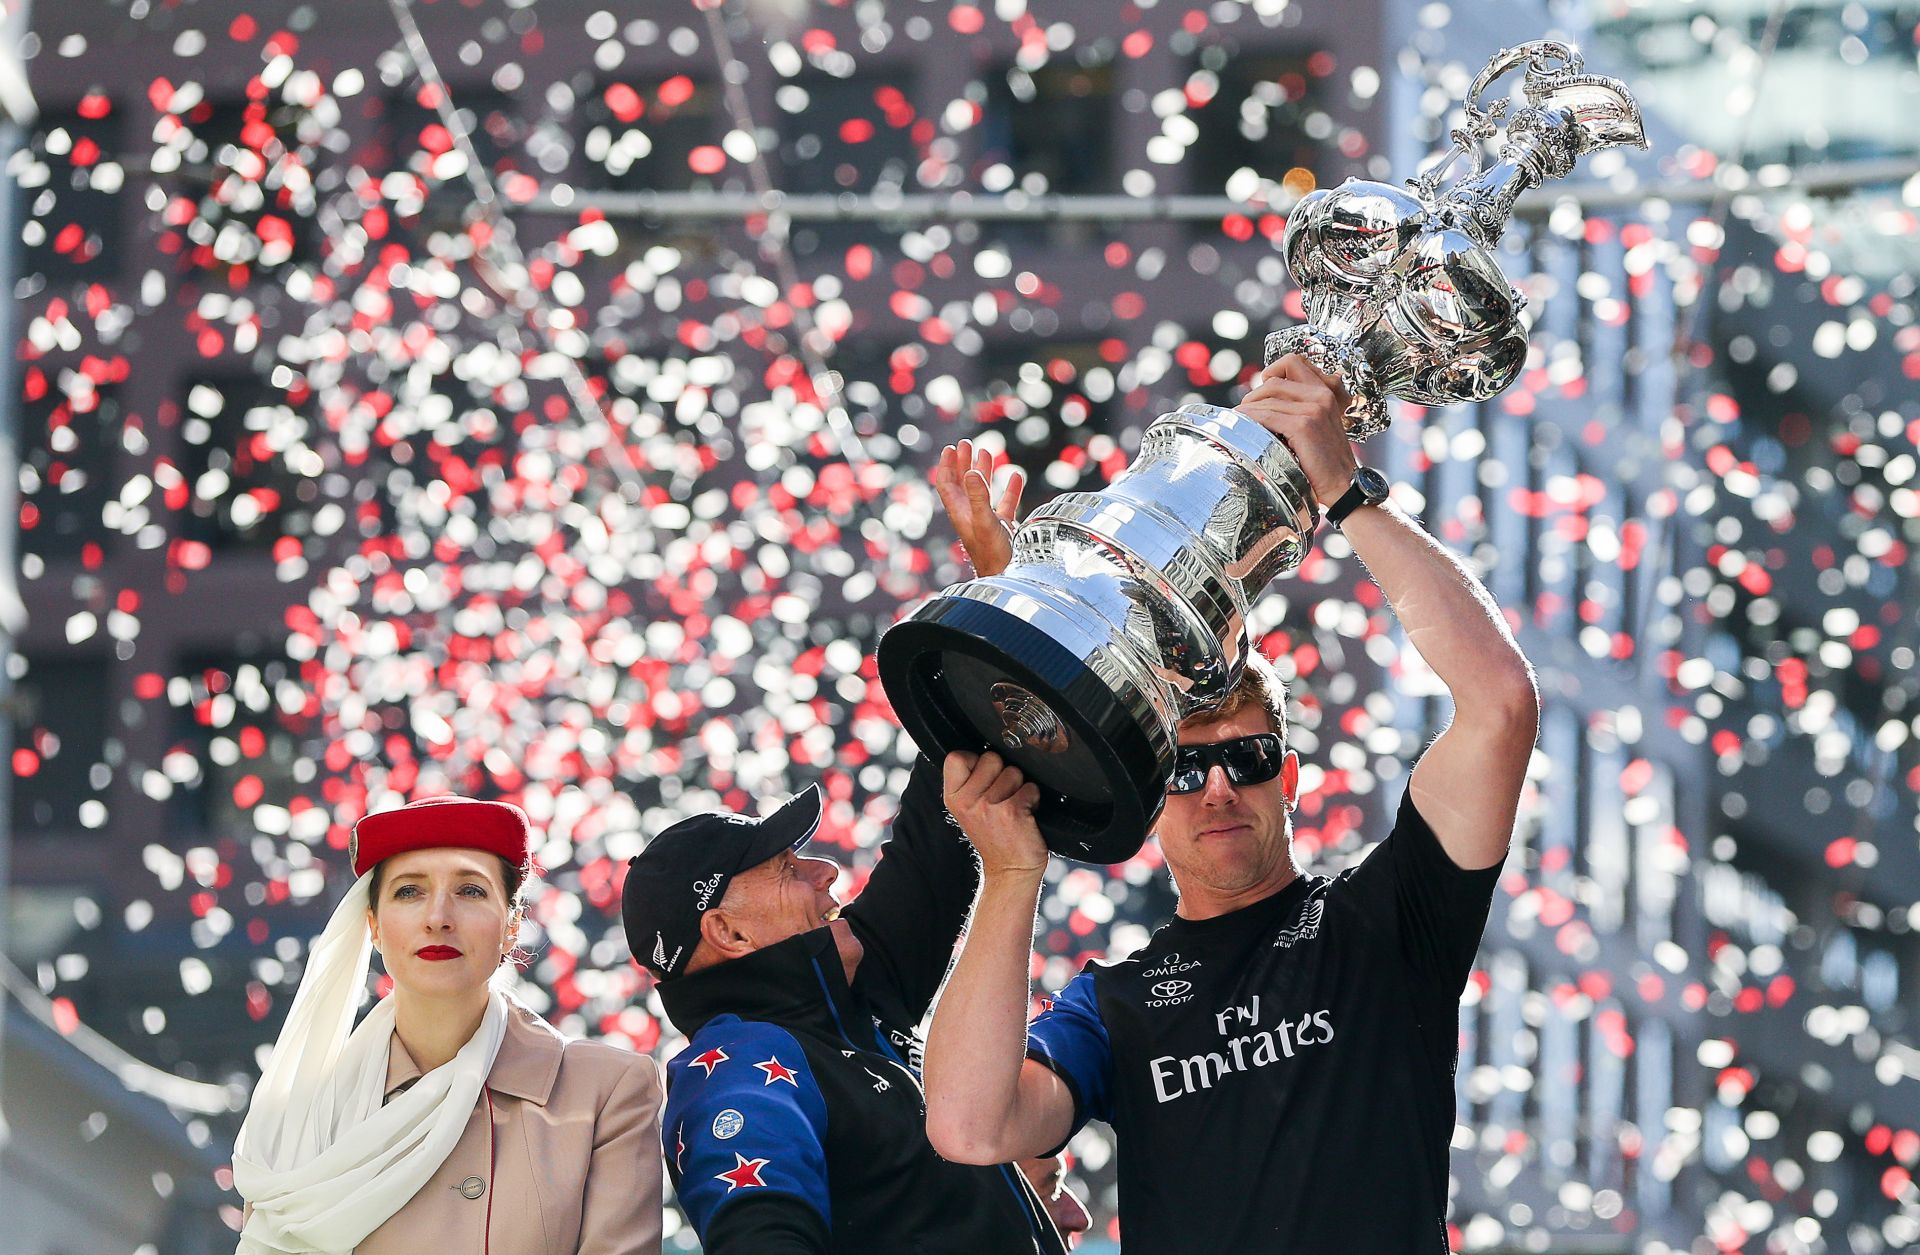 Peter Burling, the helmsman of Emirates Team New Zealand, flanked by team CEO Grant Dalton (r) and a representative from sponsor Emirates airlines, holds aloft the America's Cup during a victory parade in Wellington, New Zealand. 